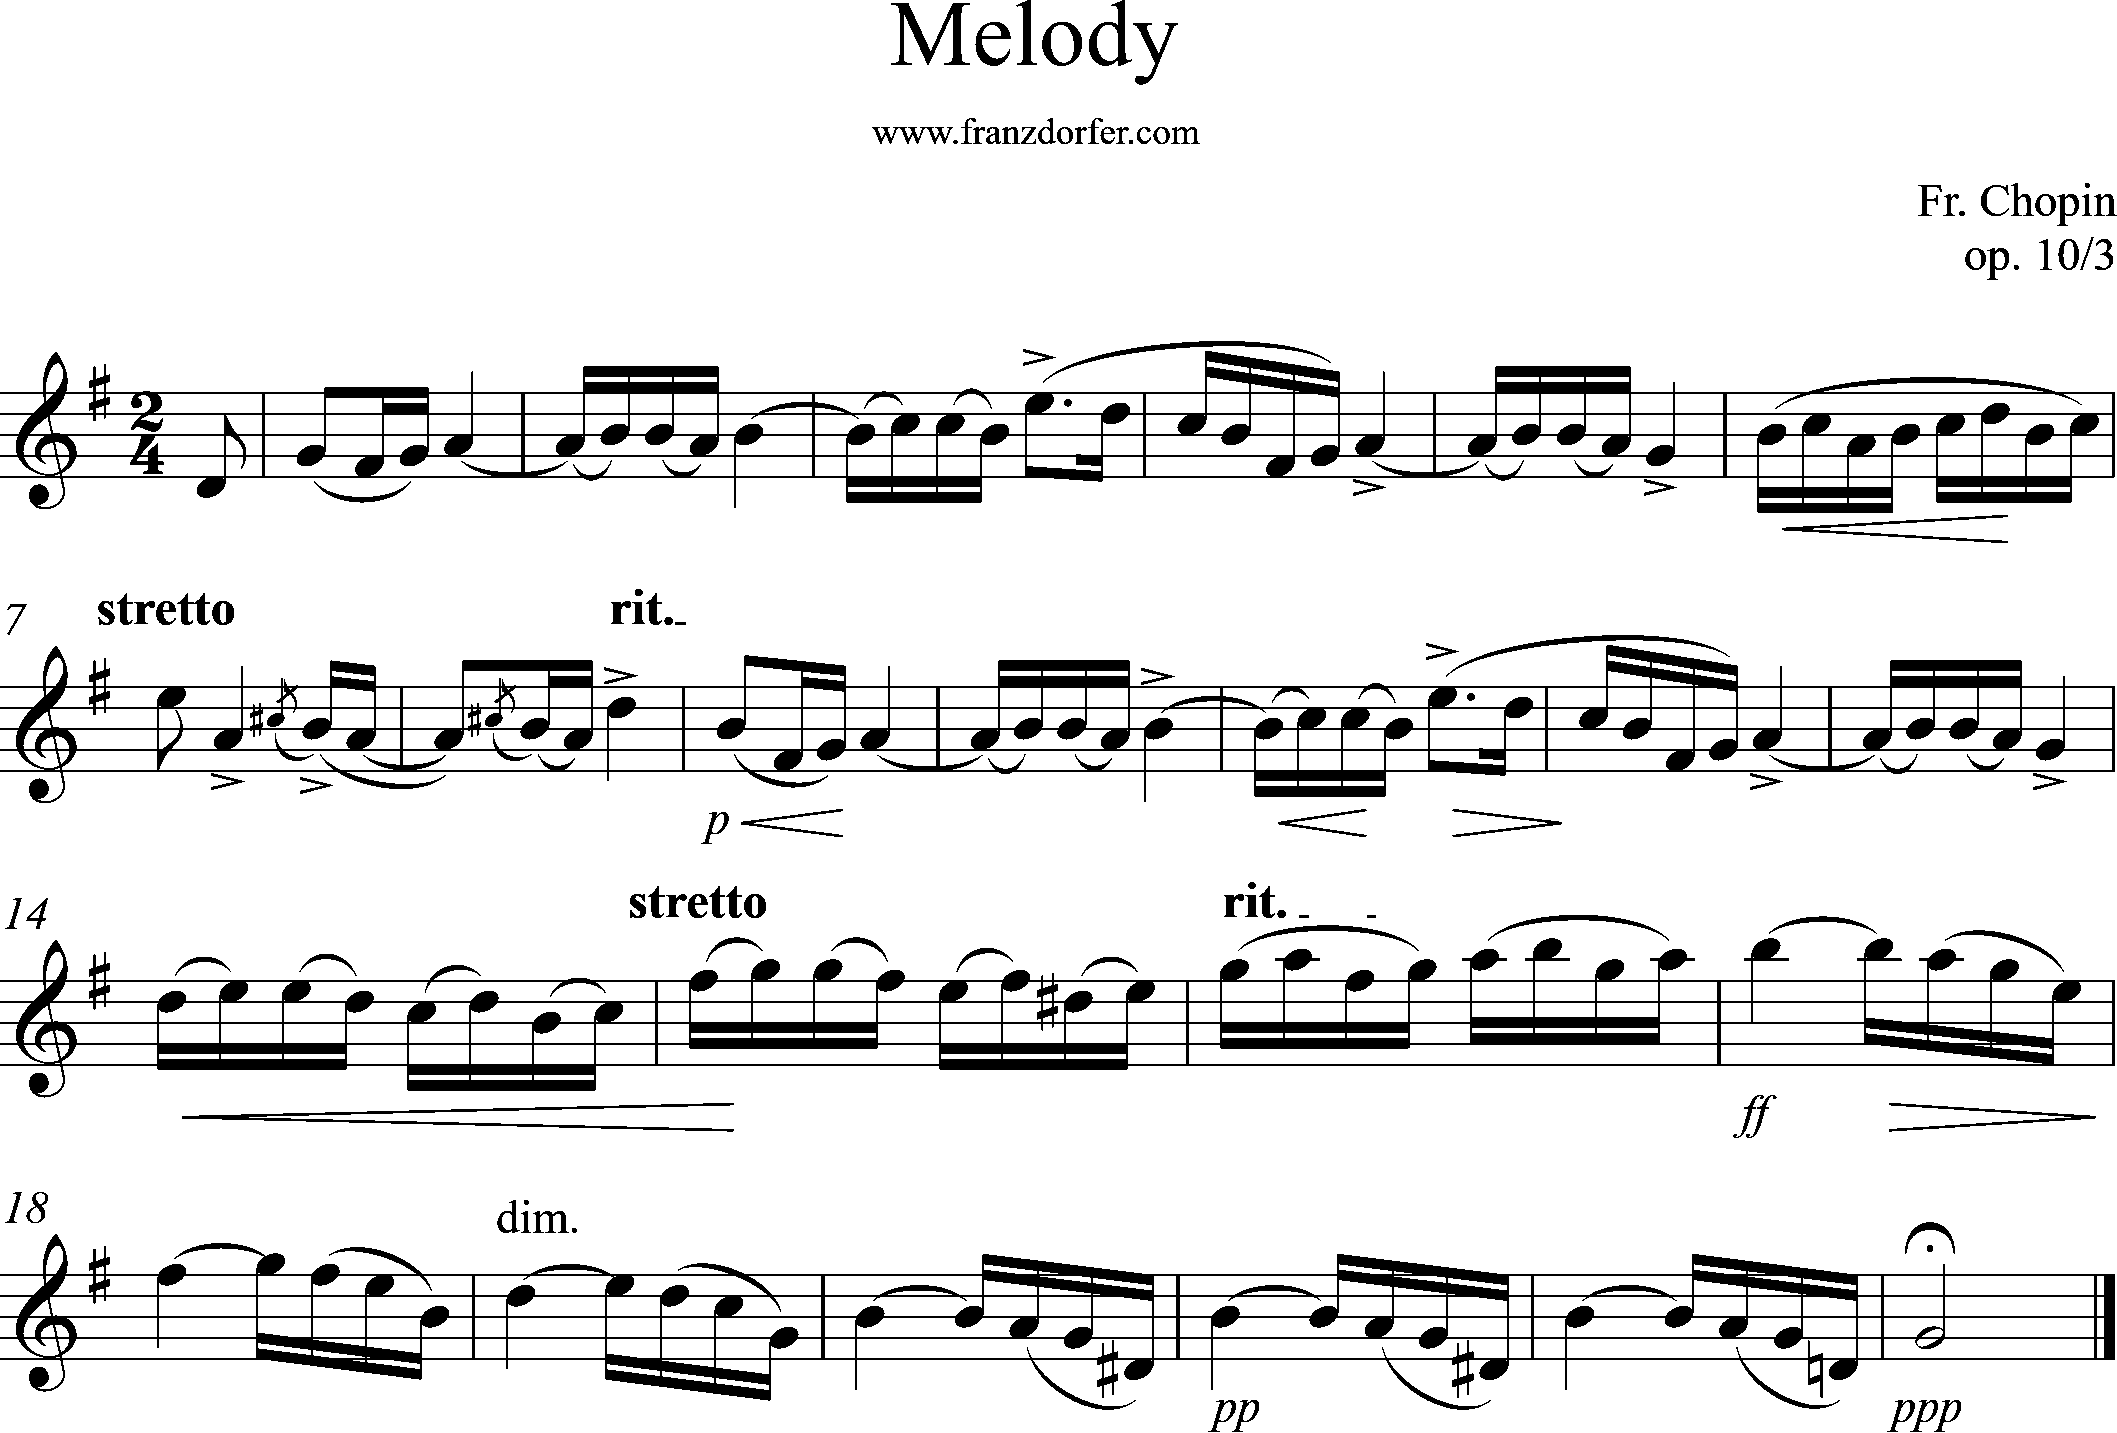 solopart, Melody, op10-3, Chopin, G-Major